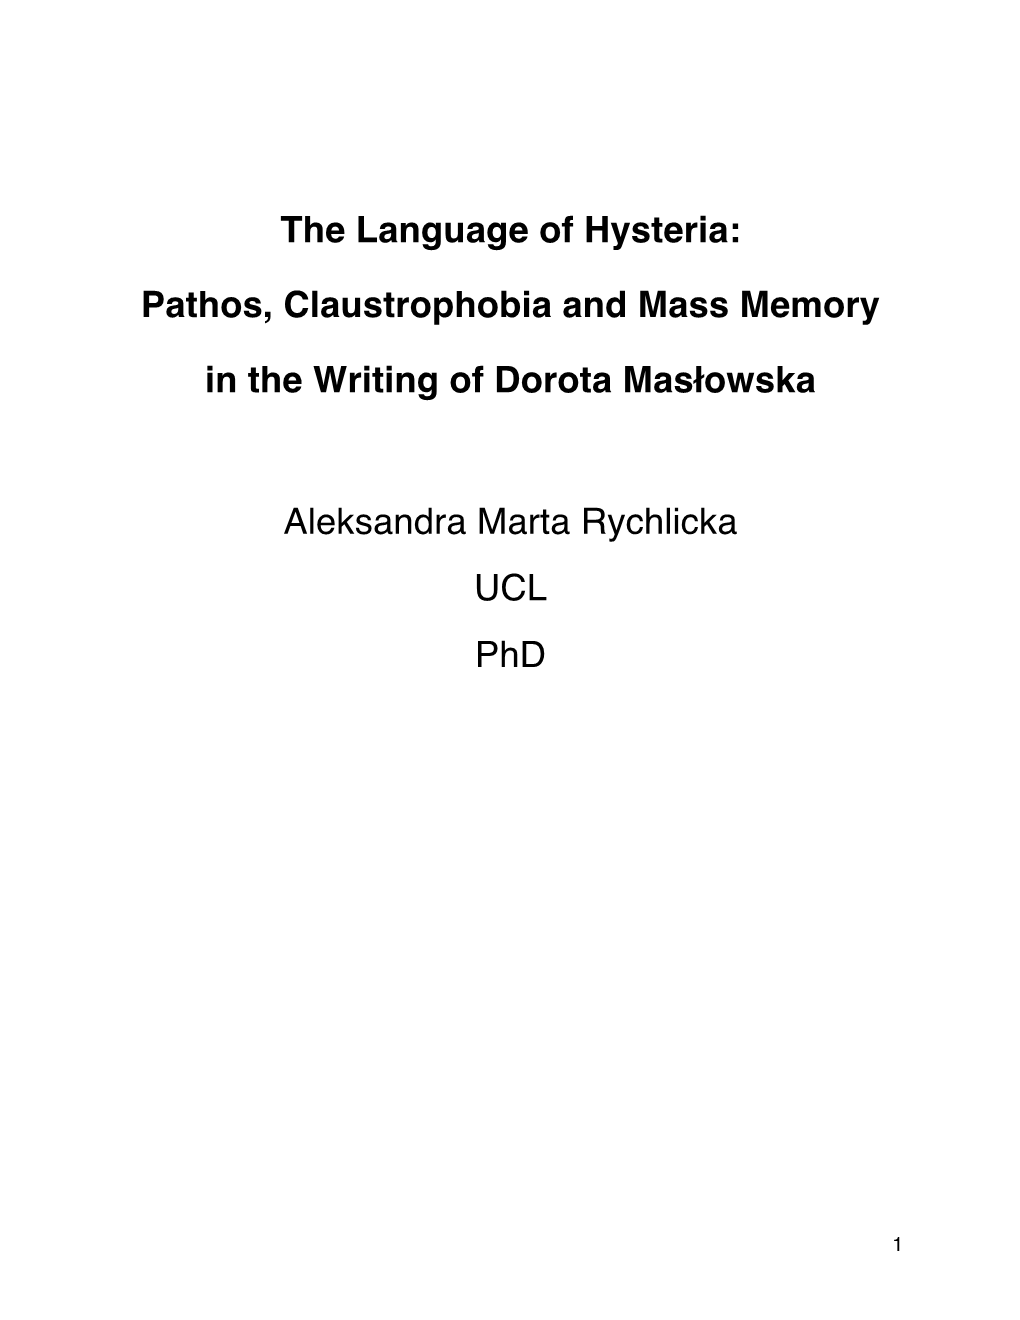 The Language of Hysteria: Pathos, Claustrophobia and Mass Memory